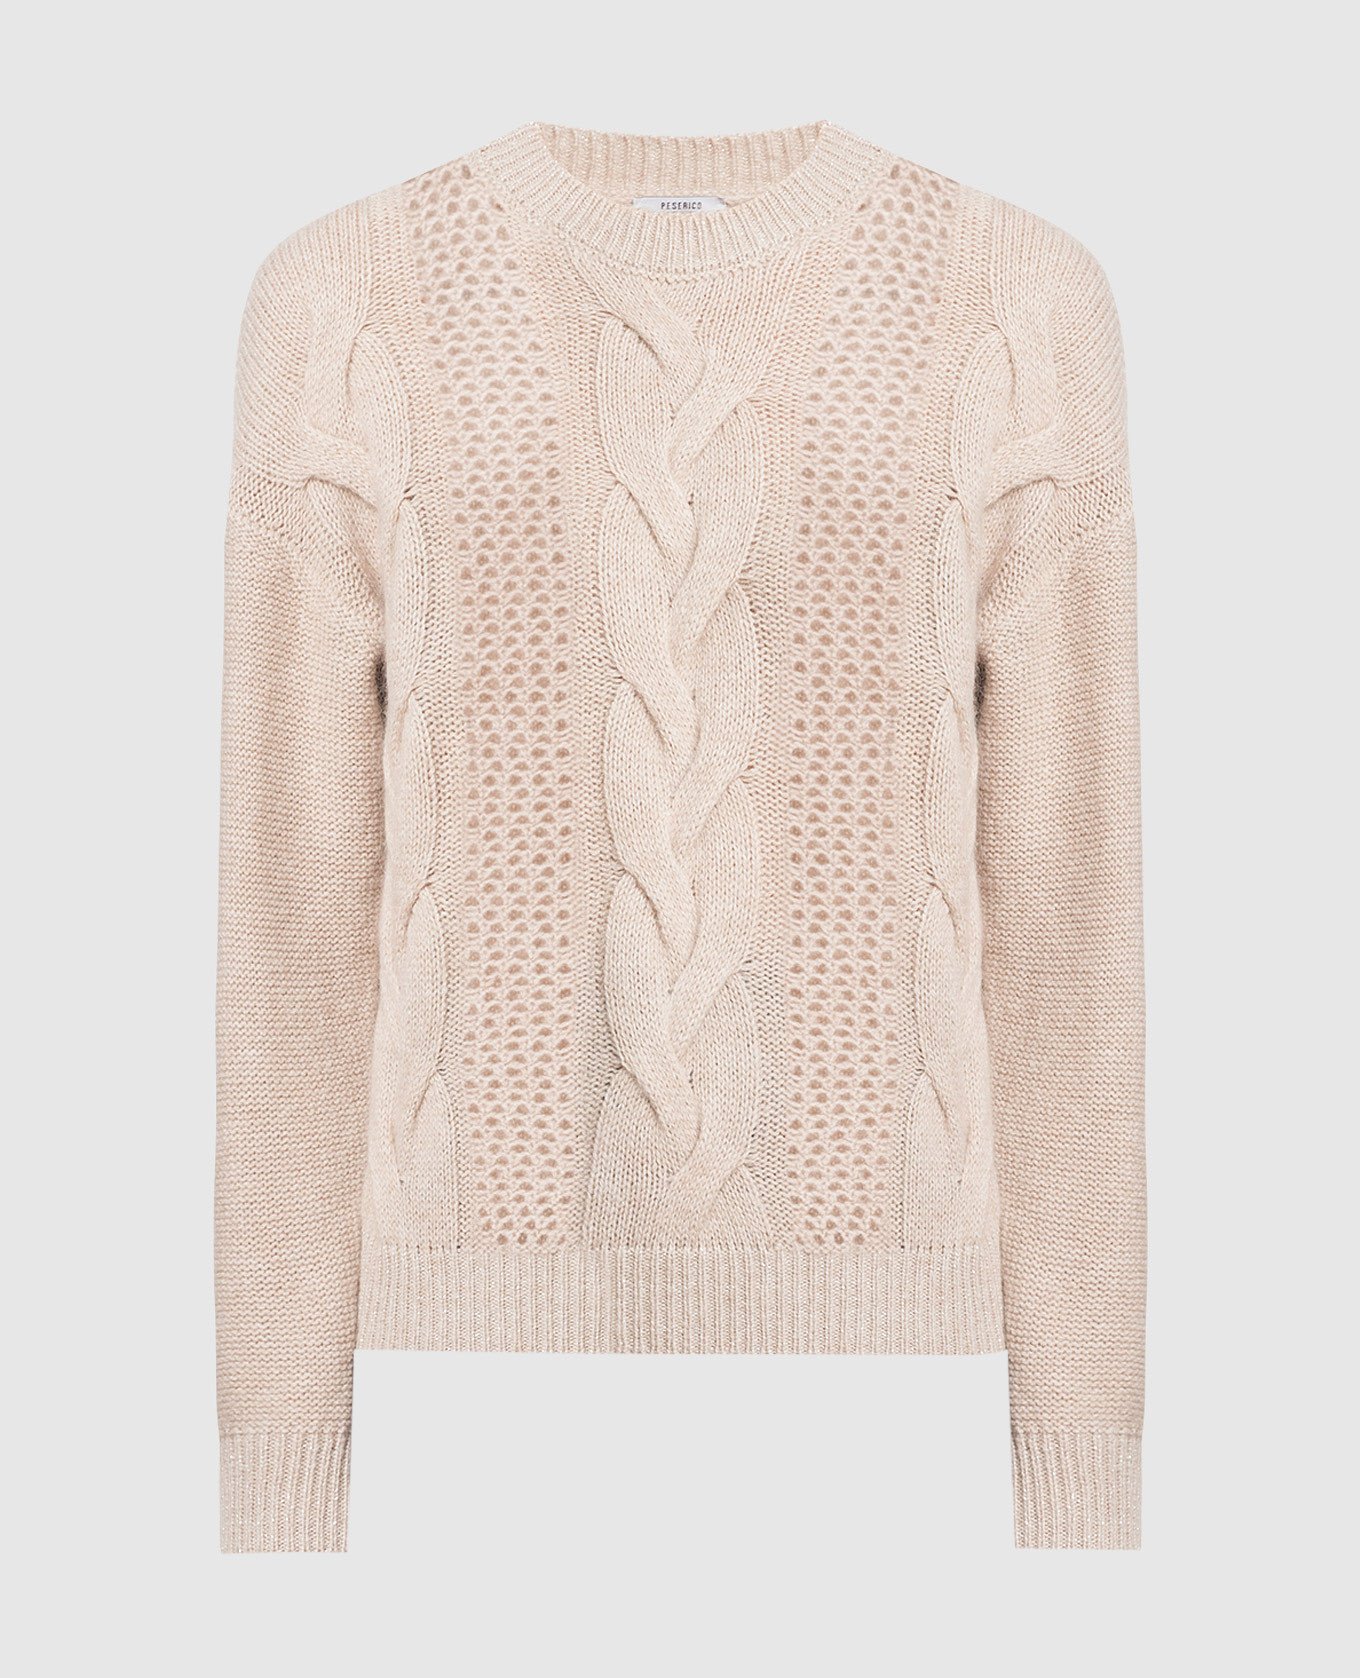 Beige wool, silk and cashmere sweater